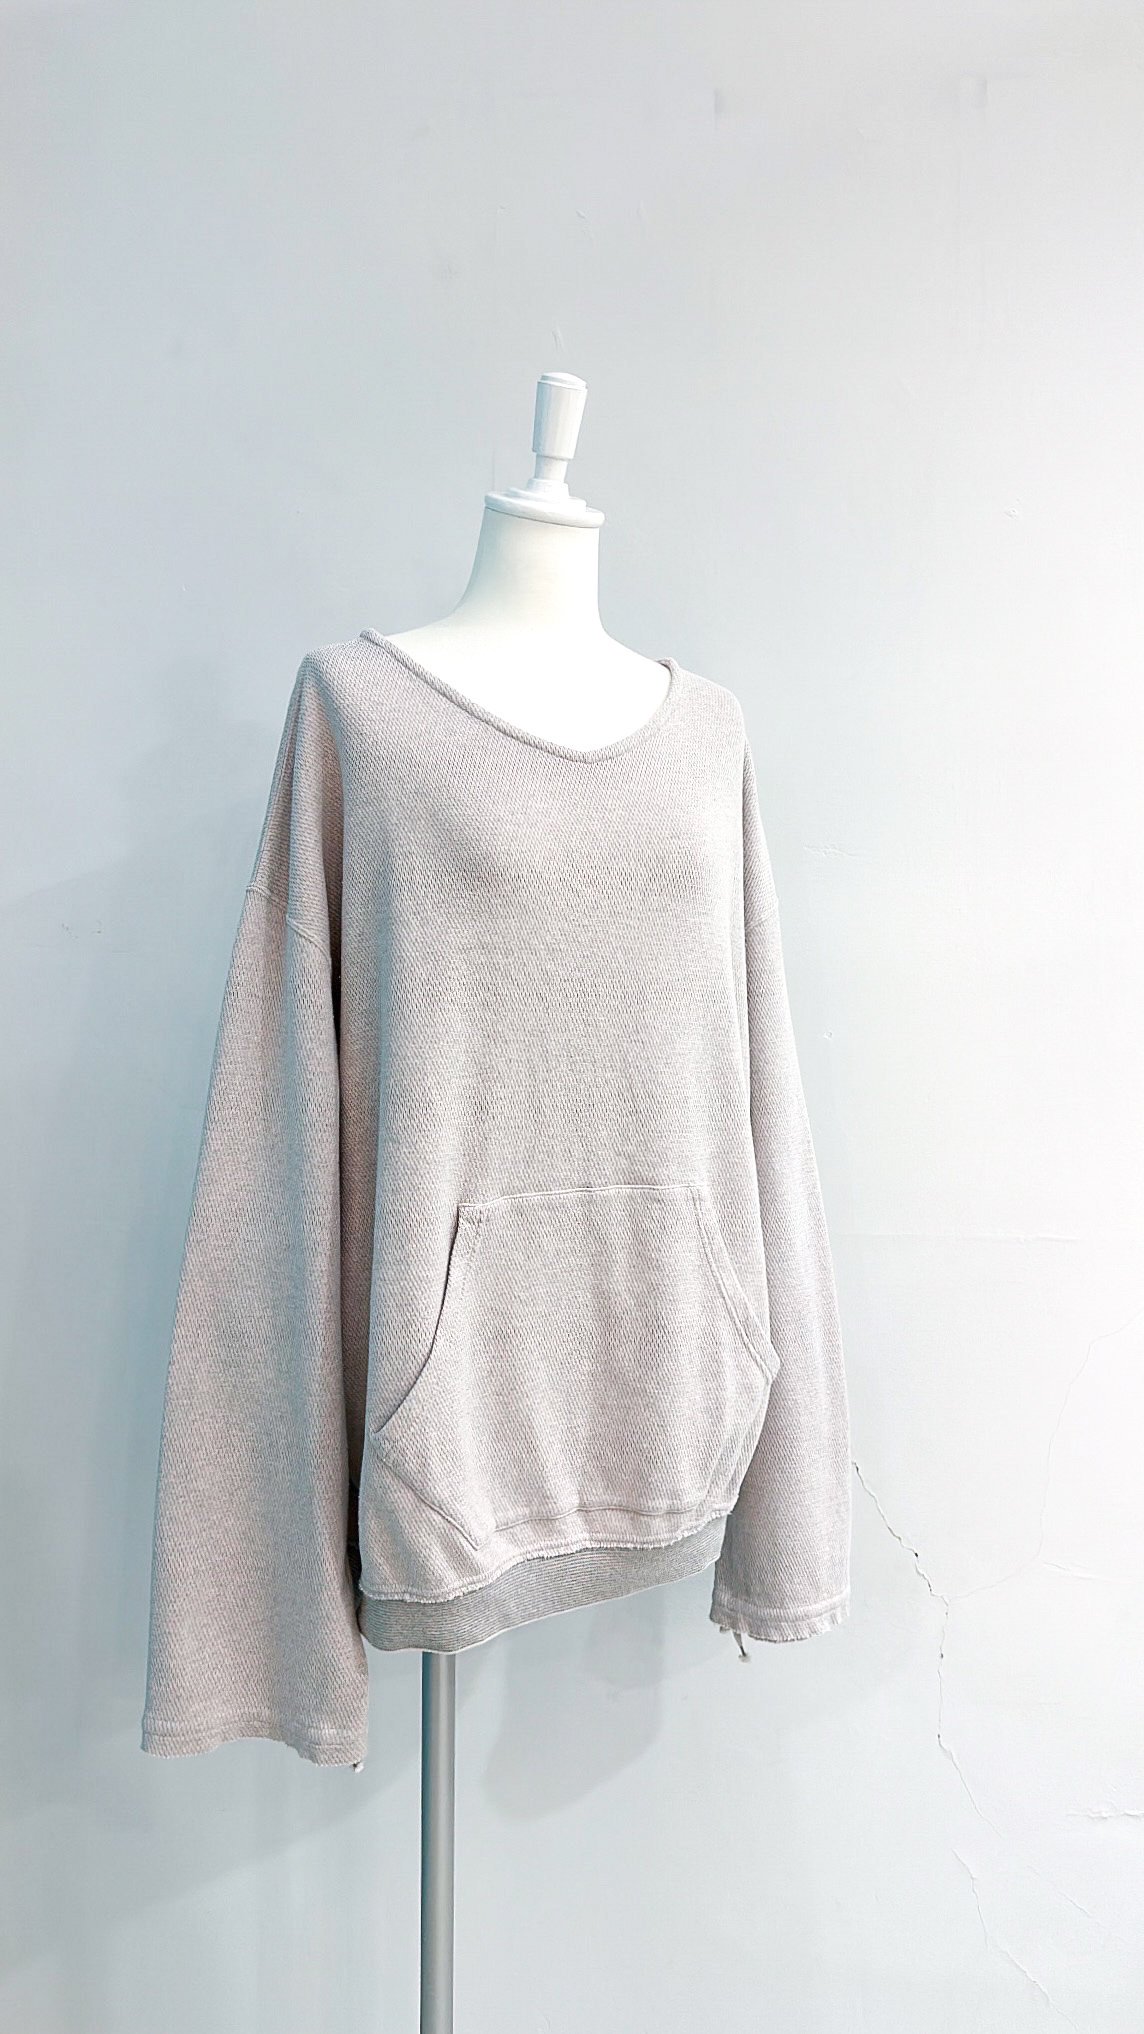 <img class='new_mark_img1' src='https://img.shop-pro.jp/img/new/icons47.gif' style='border:none;display:inline;margin:0px;padding:0px;width:auto;' />HONEYCOMB WAFFLE VN SWEAT -Knitting Rib Over Dyeing-